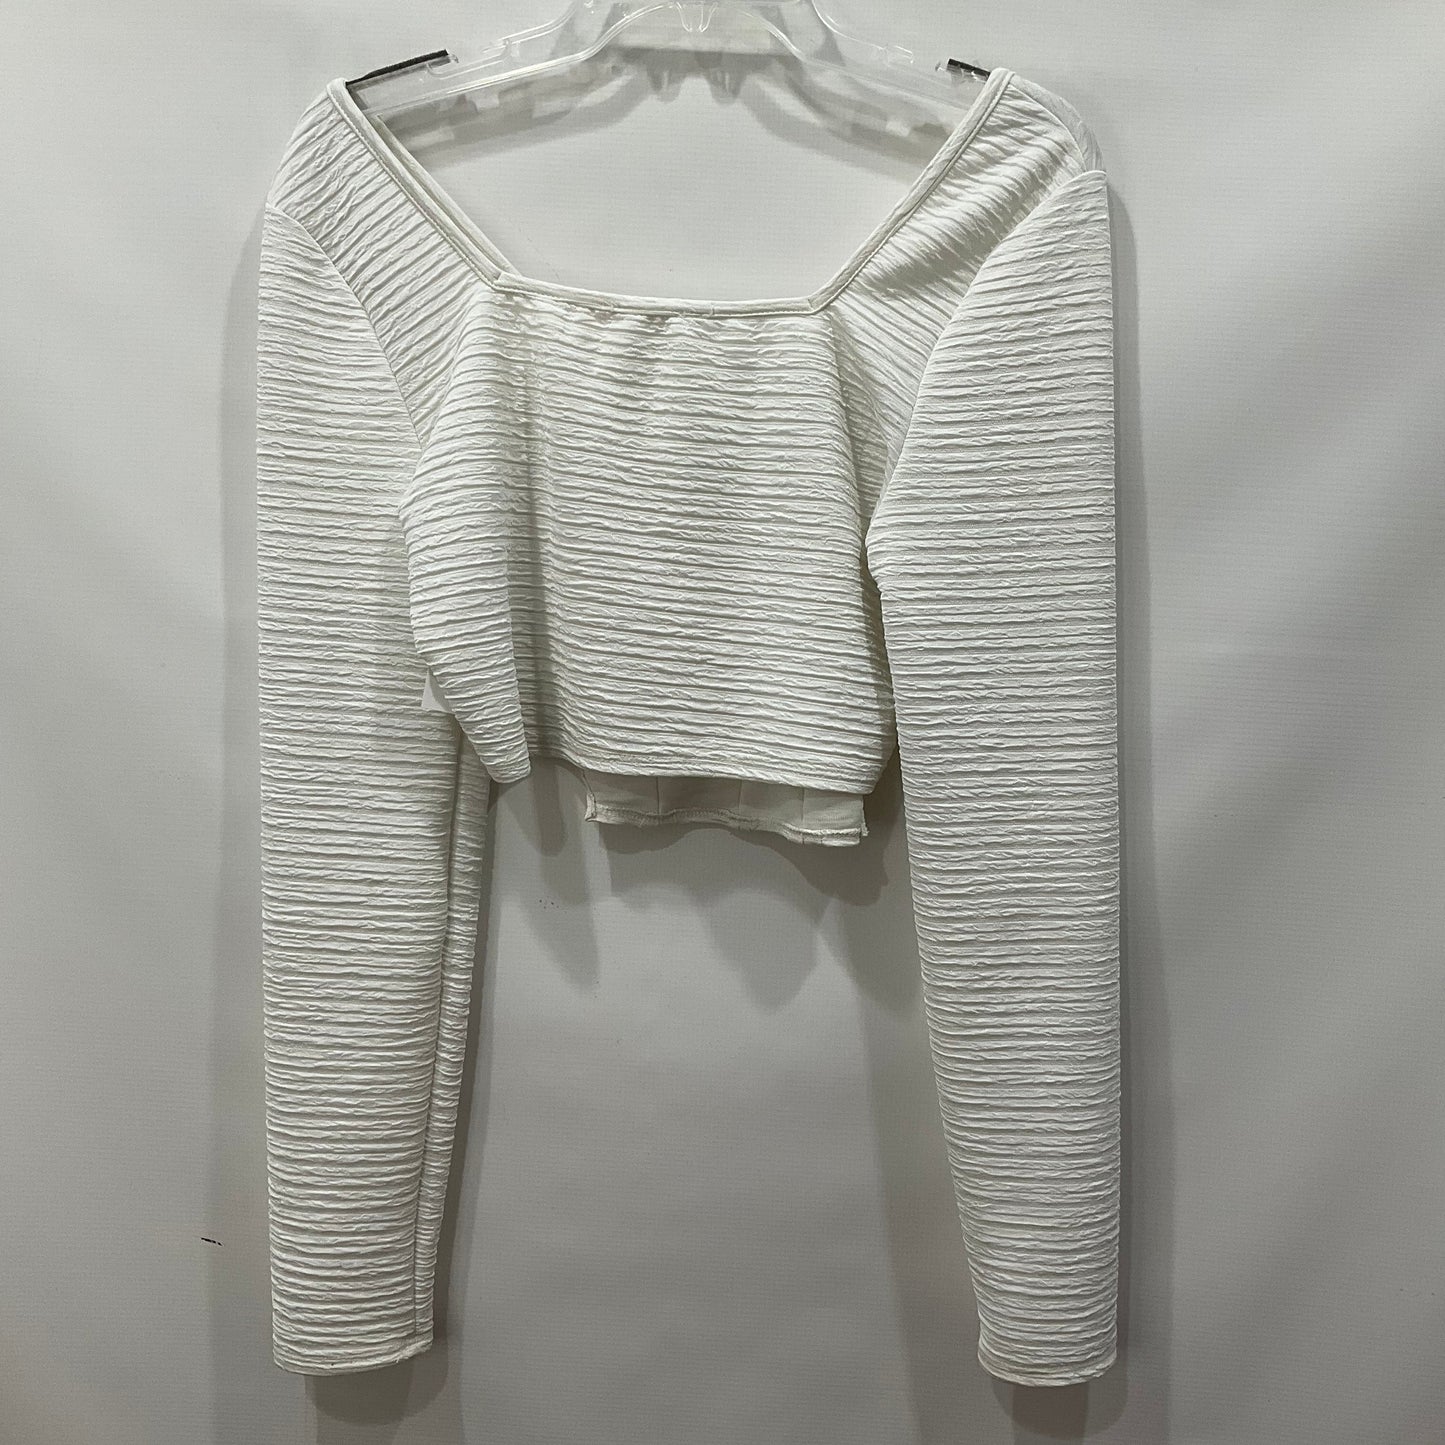 White Top Long Sleeve The Native One, Size L